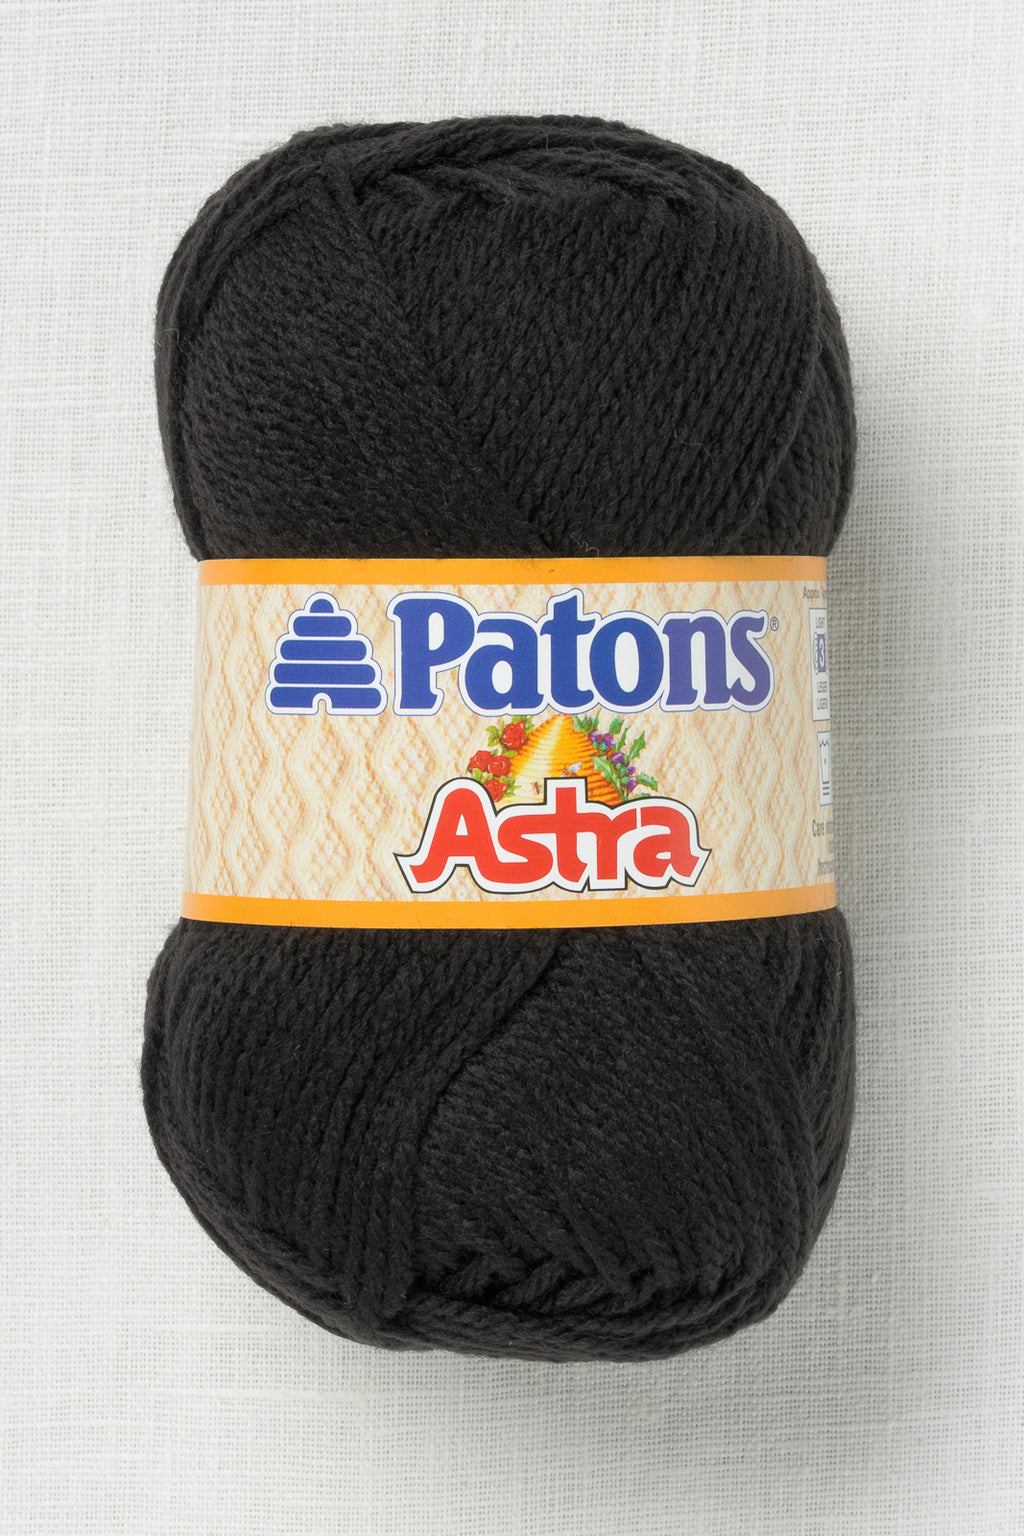 Patons Astra Black